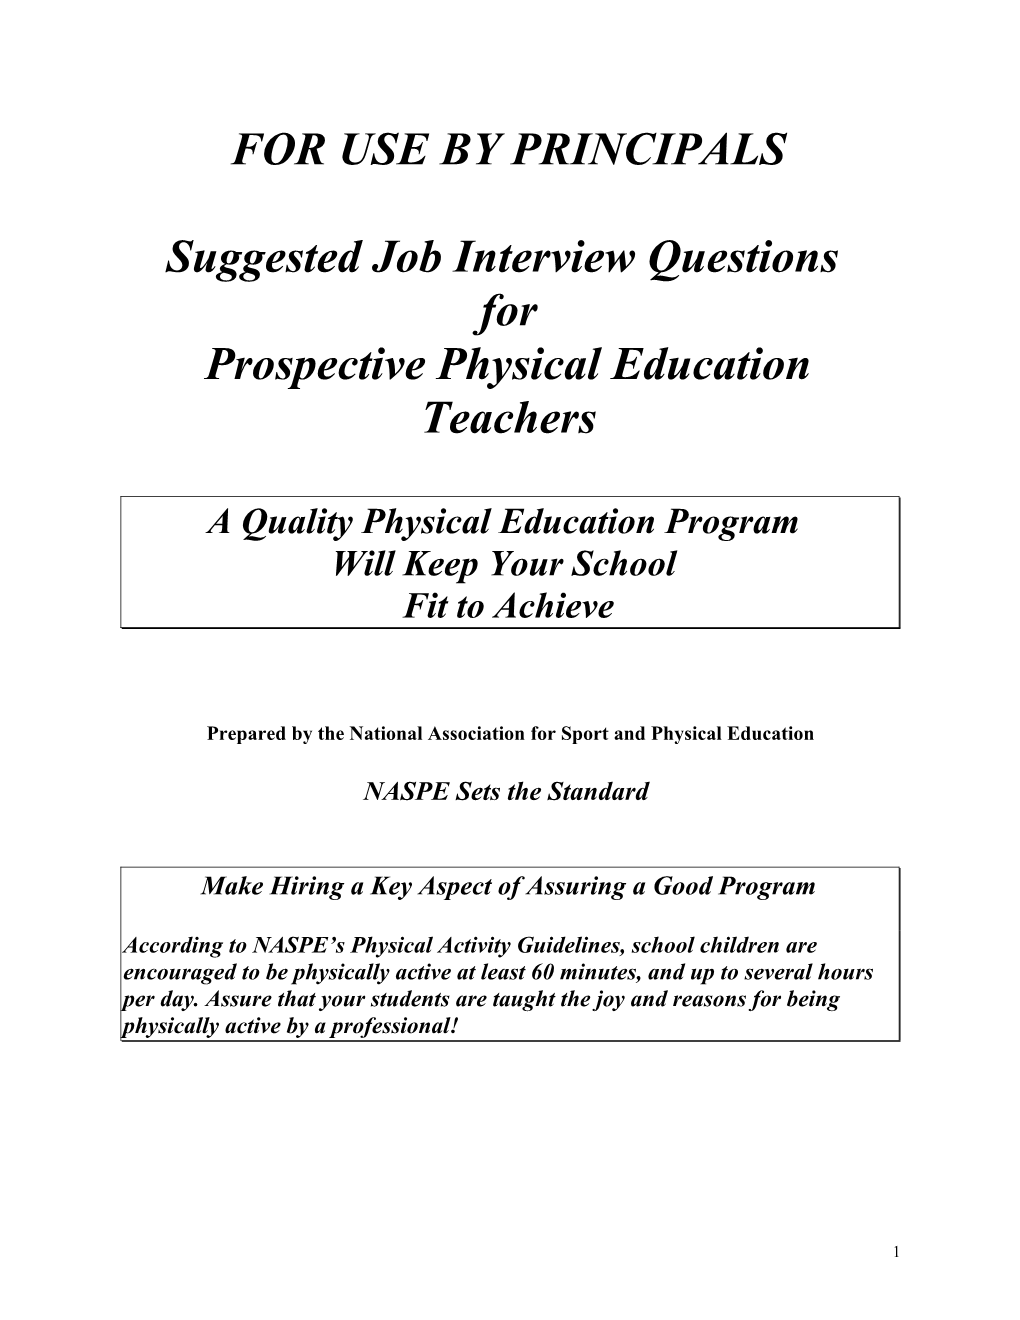 Suggested Job Interview Questions